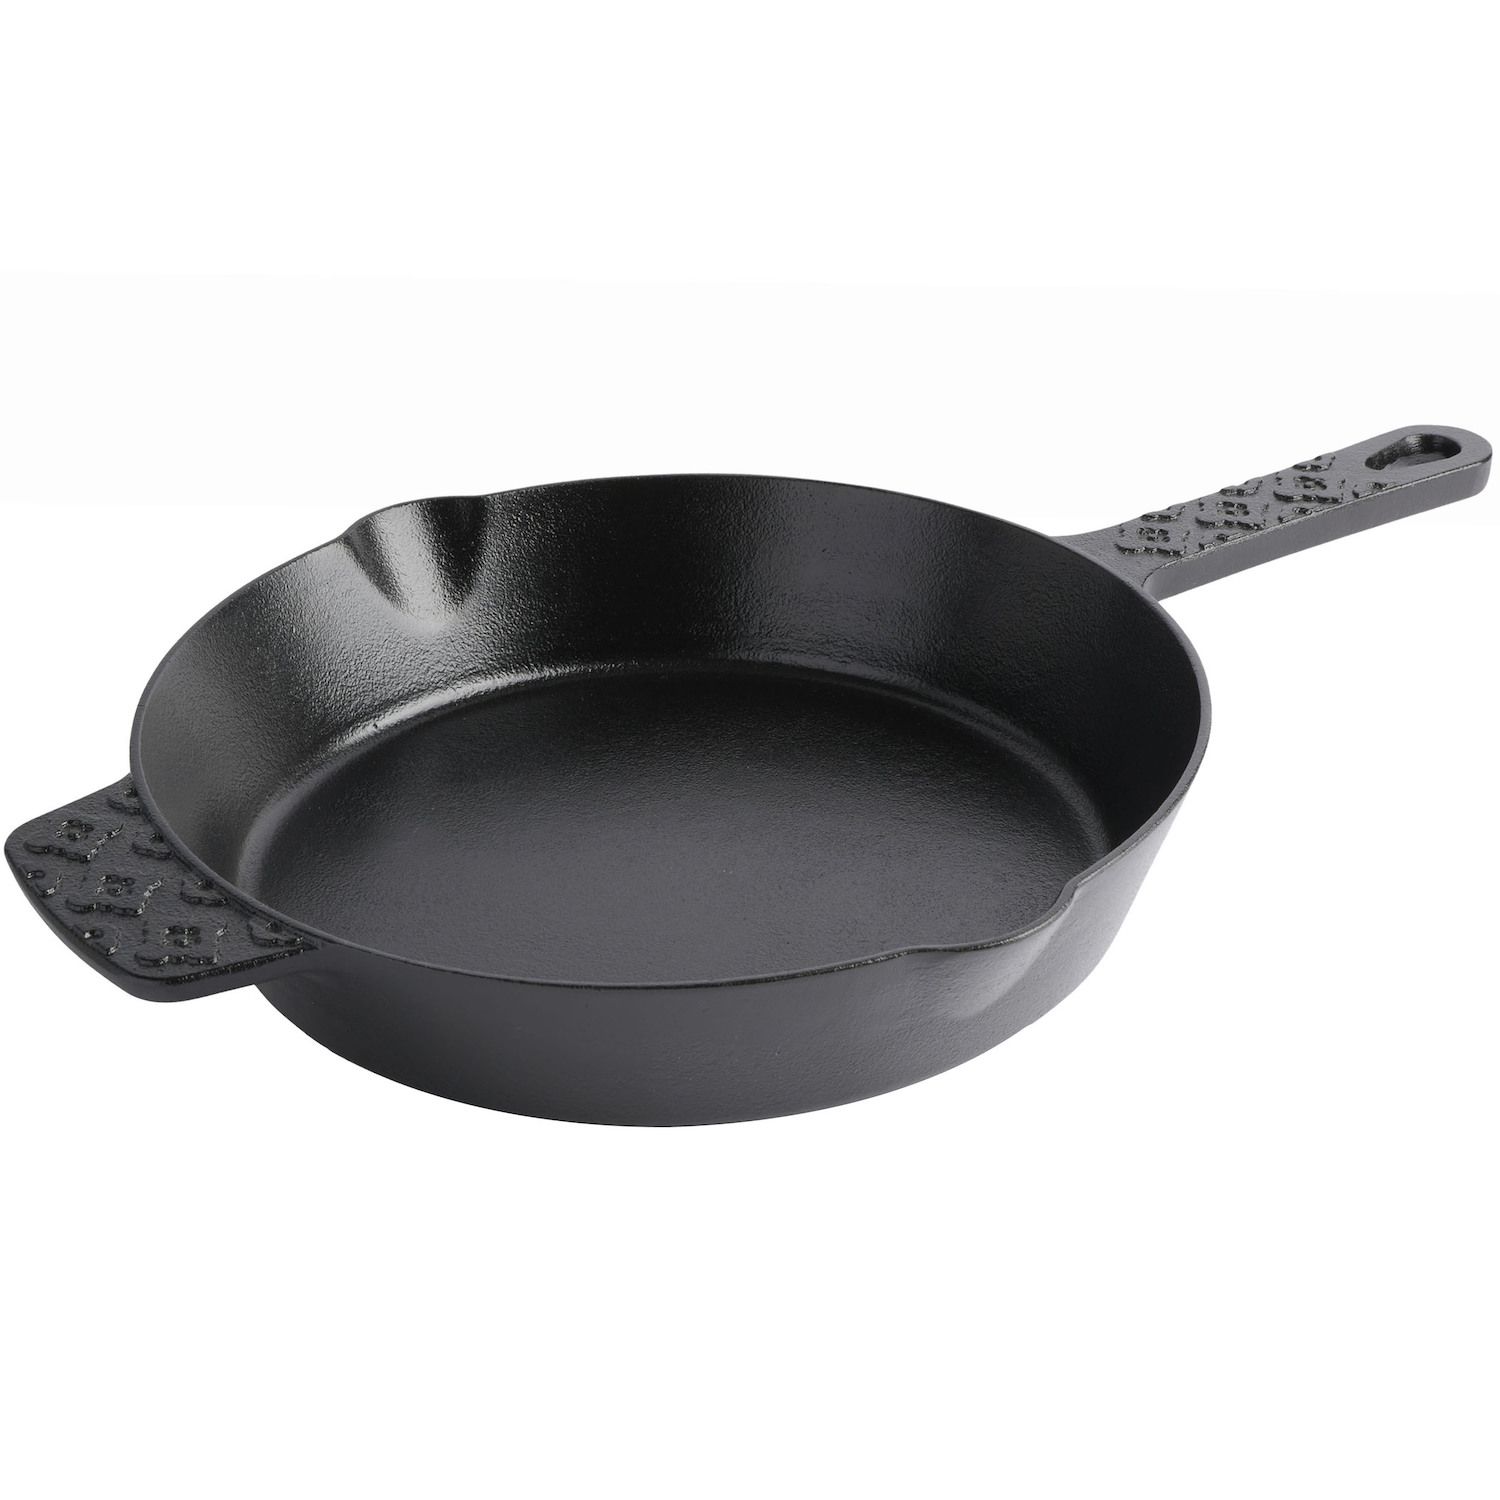 MegaChef 10 Inch Round Preseasoned Cast Iron Frying Pan with